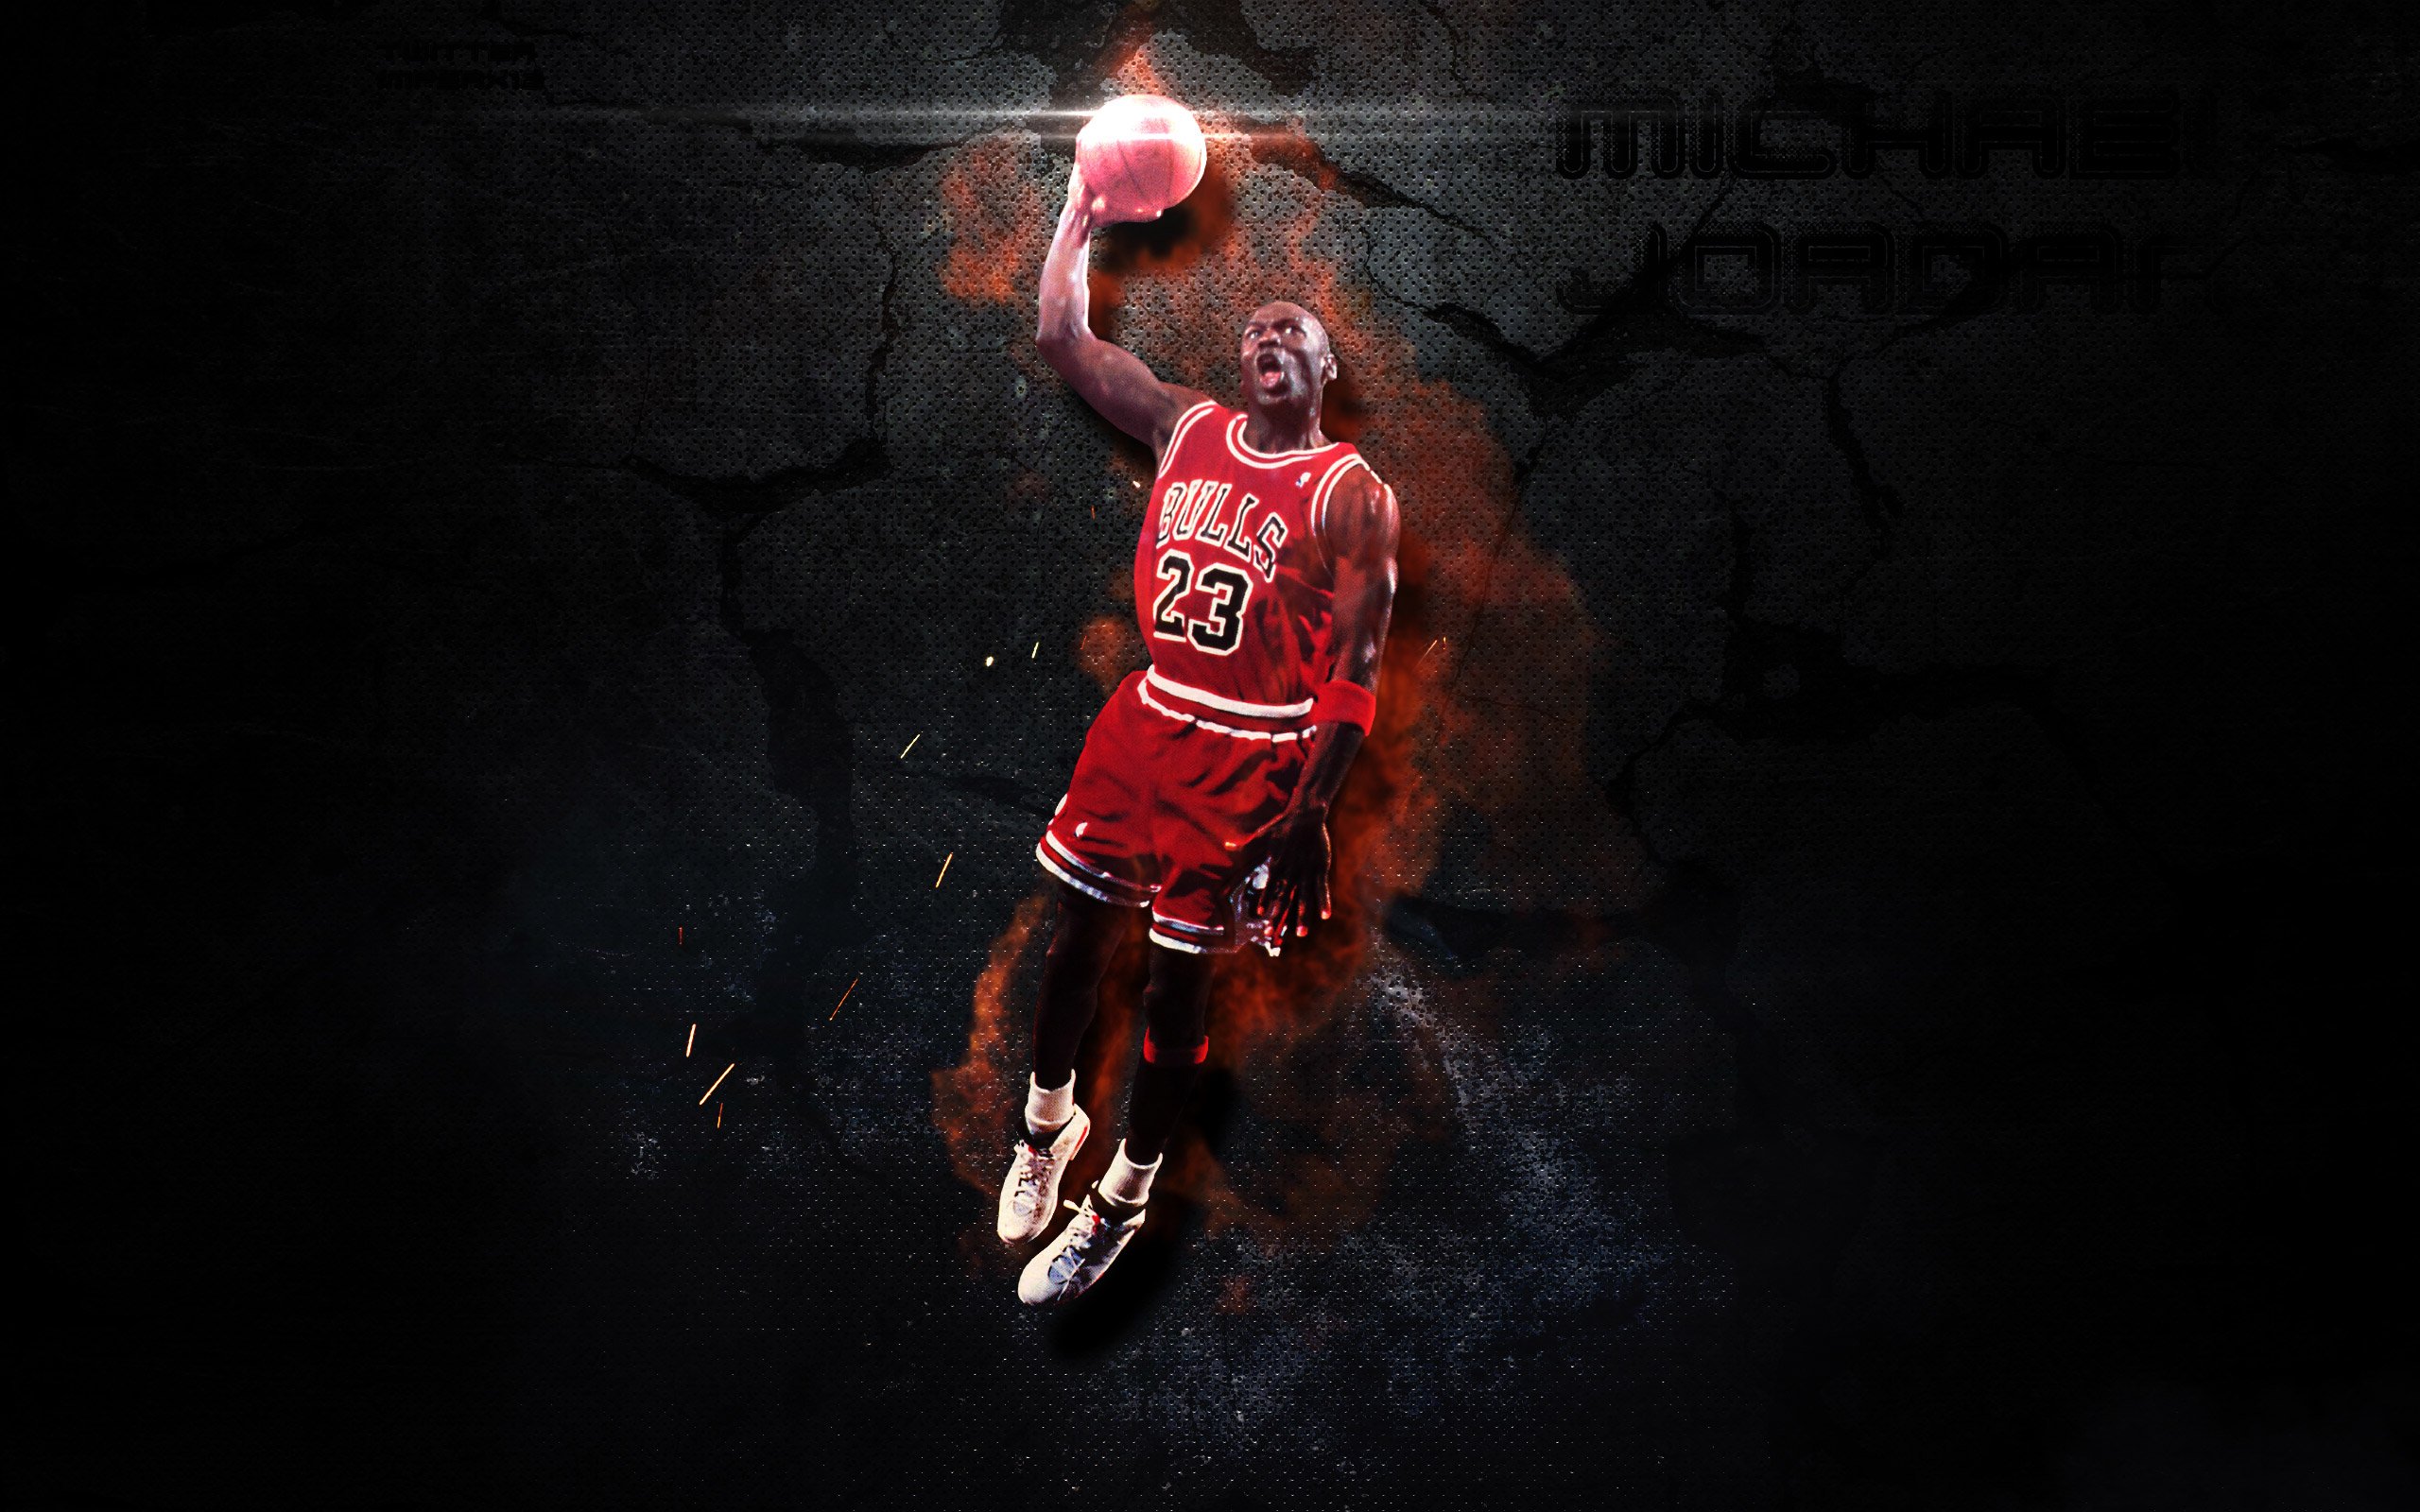 Jordan Wallpapers HD free download Wallpapers Backgrounds Images